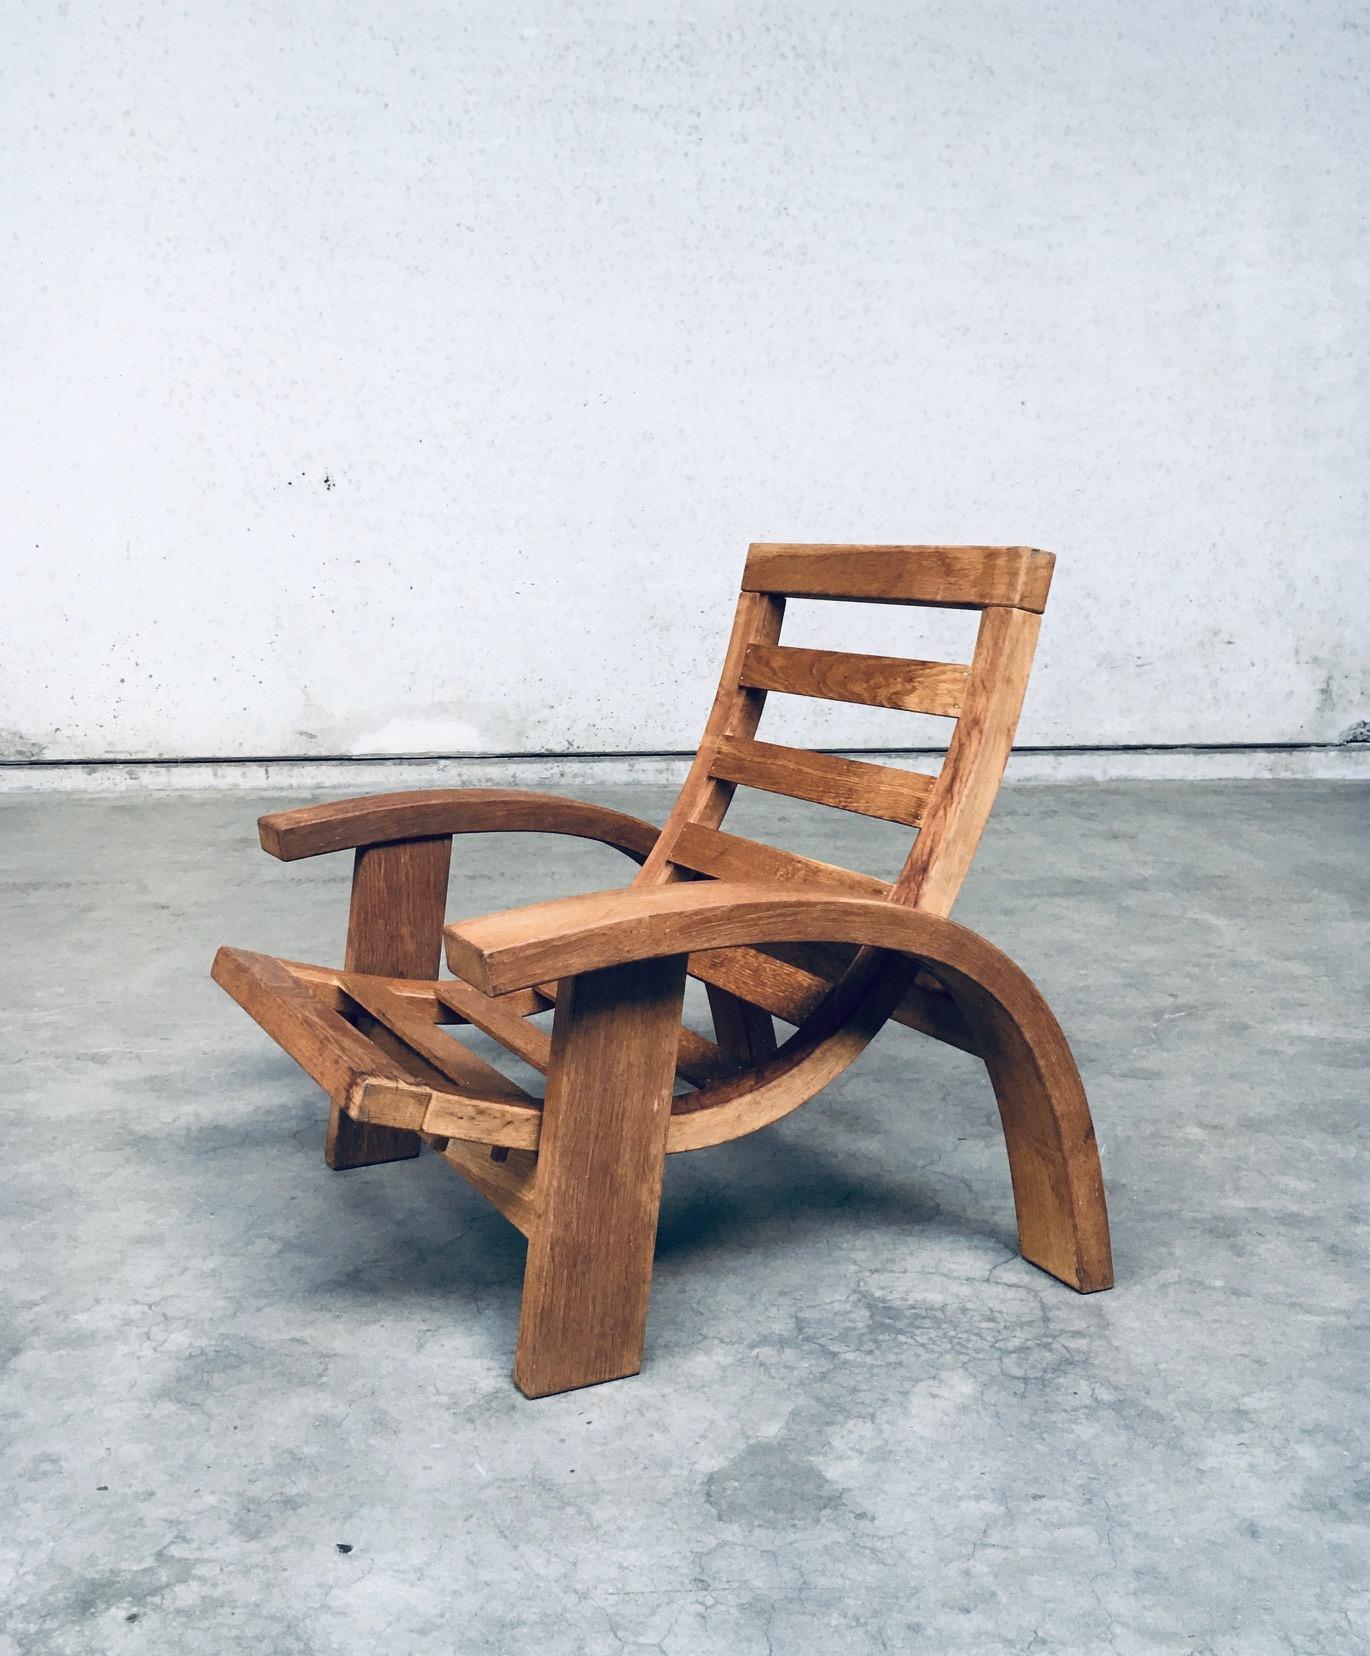 Original and one of a kind Postmodern Design solid oak adjustable Lounge Chair. Made in Belgium, 1980's / 90's period. Solid oak constructed arm chair with adjustable seat. Architectural in design with beautiful forms. This lounge chair has been